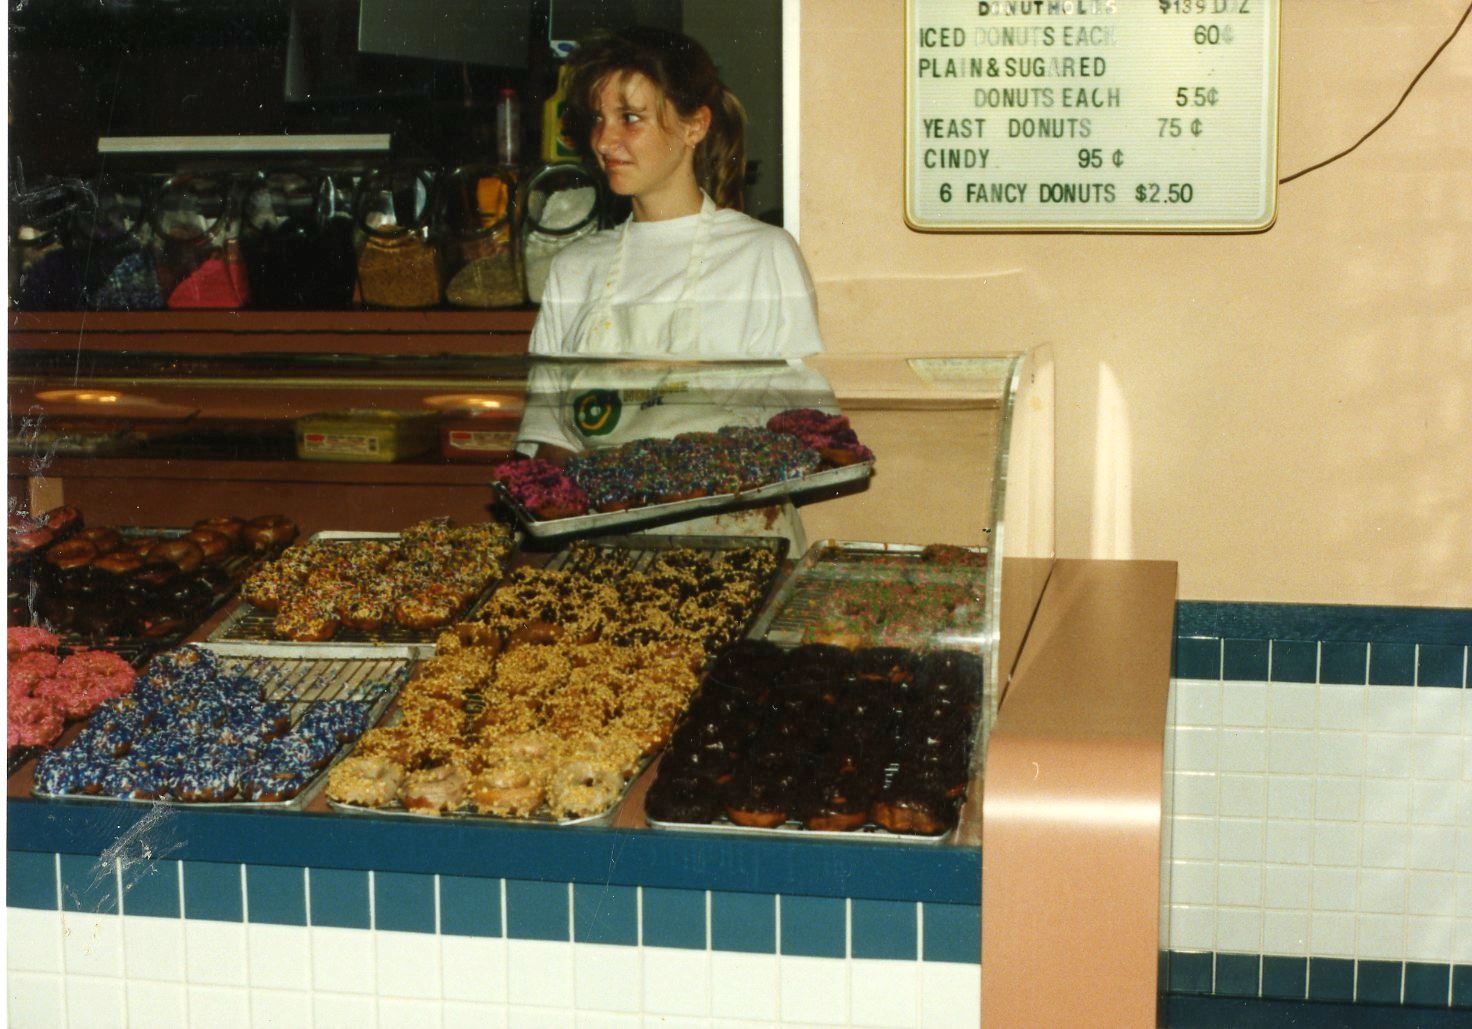 Shyla Seller at Hol n One Donut House Opens in new window